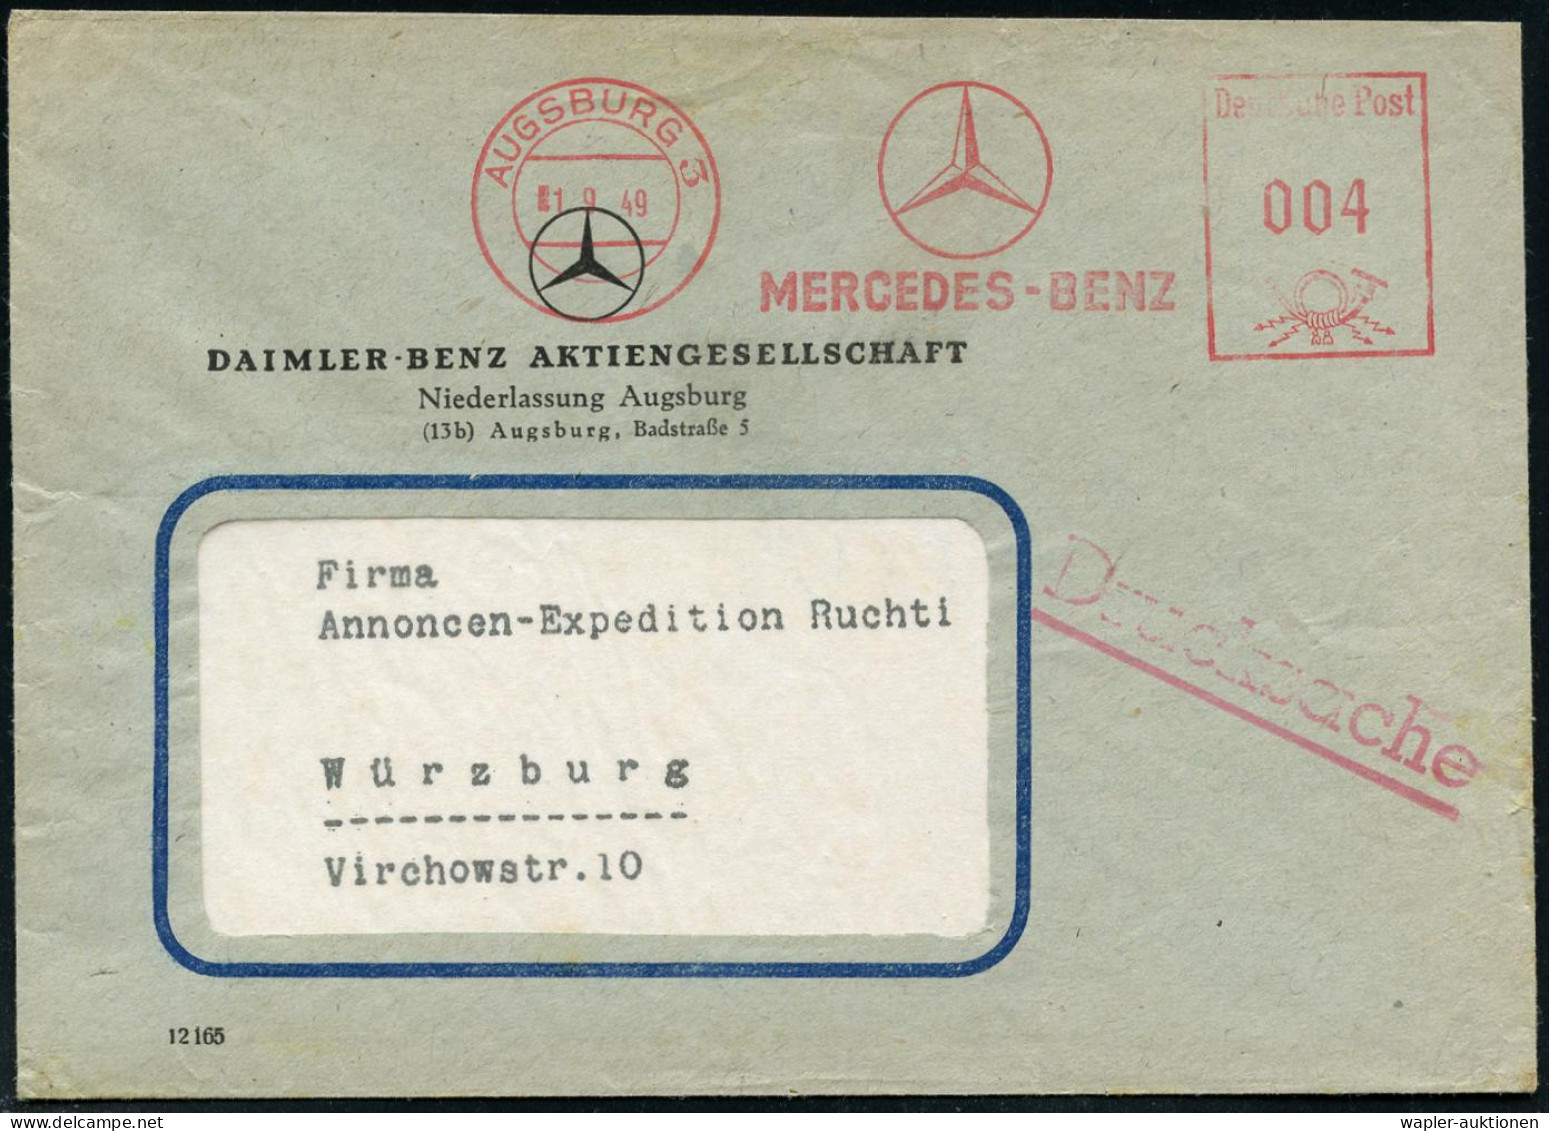 MERCEDES-BENZ  / DAIMLER BENZ - MERCEDES-BENZ / DAIMLER BENZ - MERCEDES-BENZ / DAIMLER BENZ - MERCEDES-BENZ / DAIMLER BE - Cars